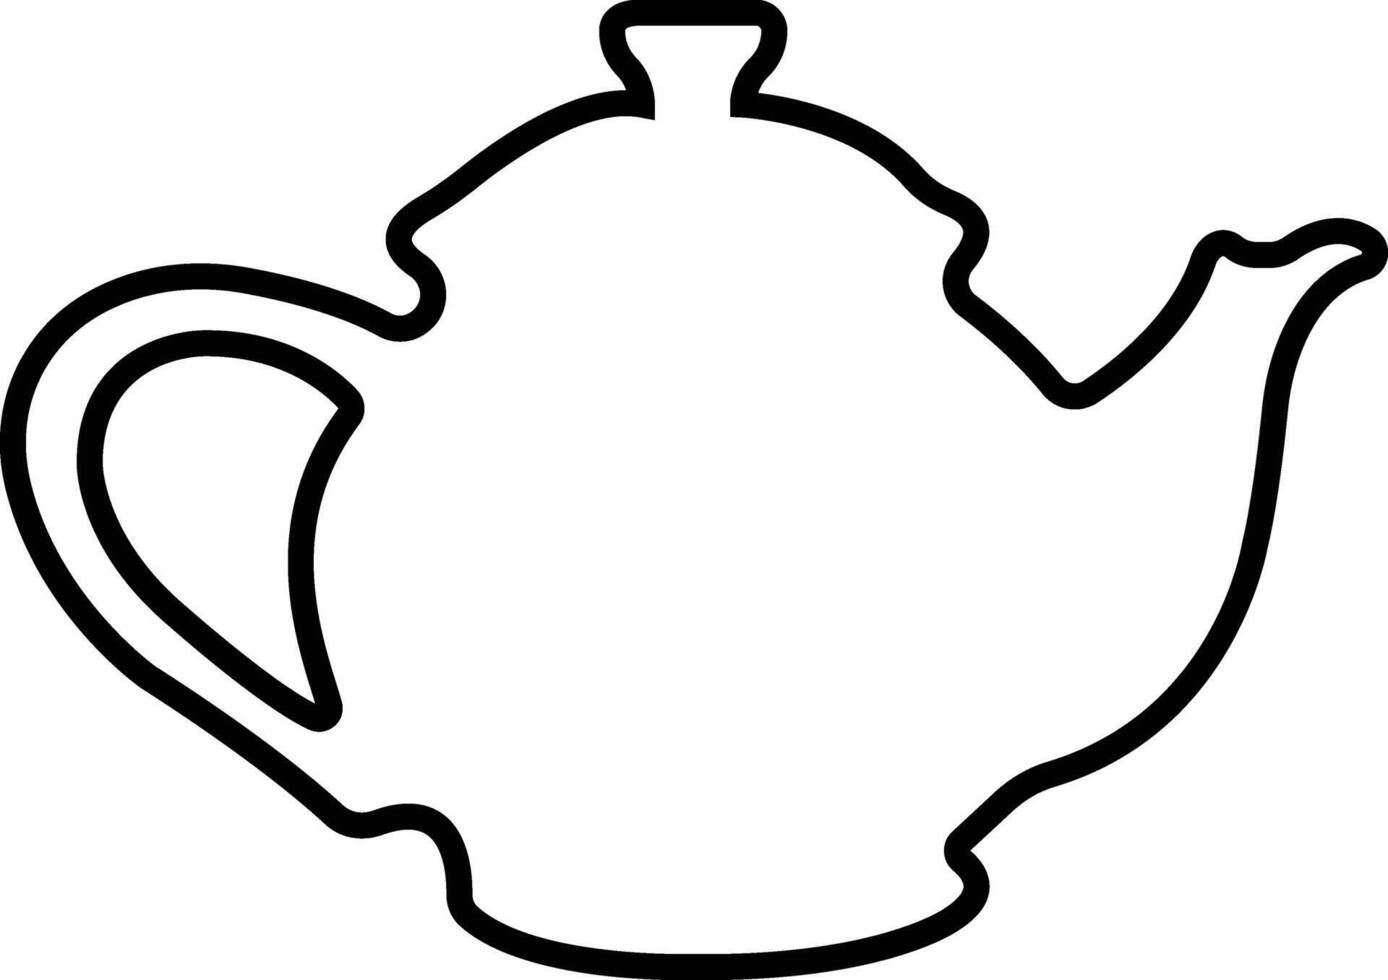 Tea pot icon in line style. isolated on Tea kettle or teapot sign and symbol. teapots, drinking coffee pot. Abstract design Logotype art vector for apps website